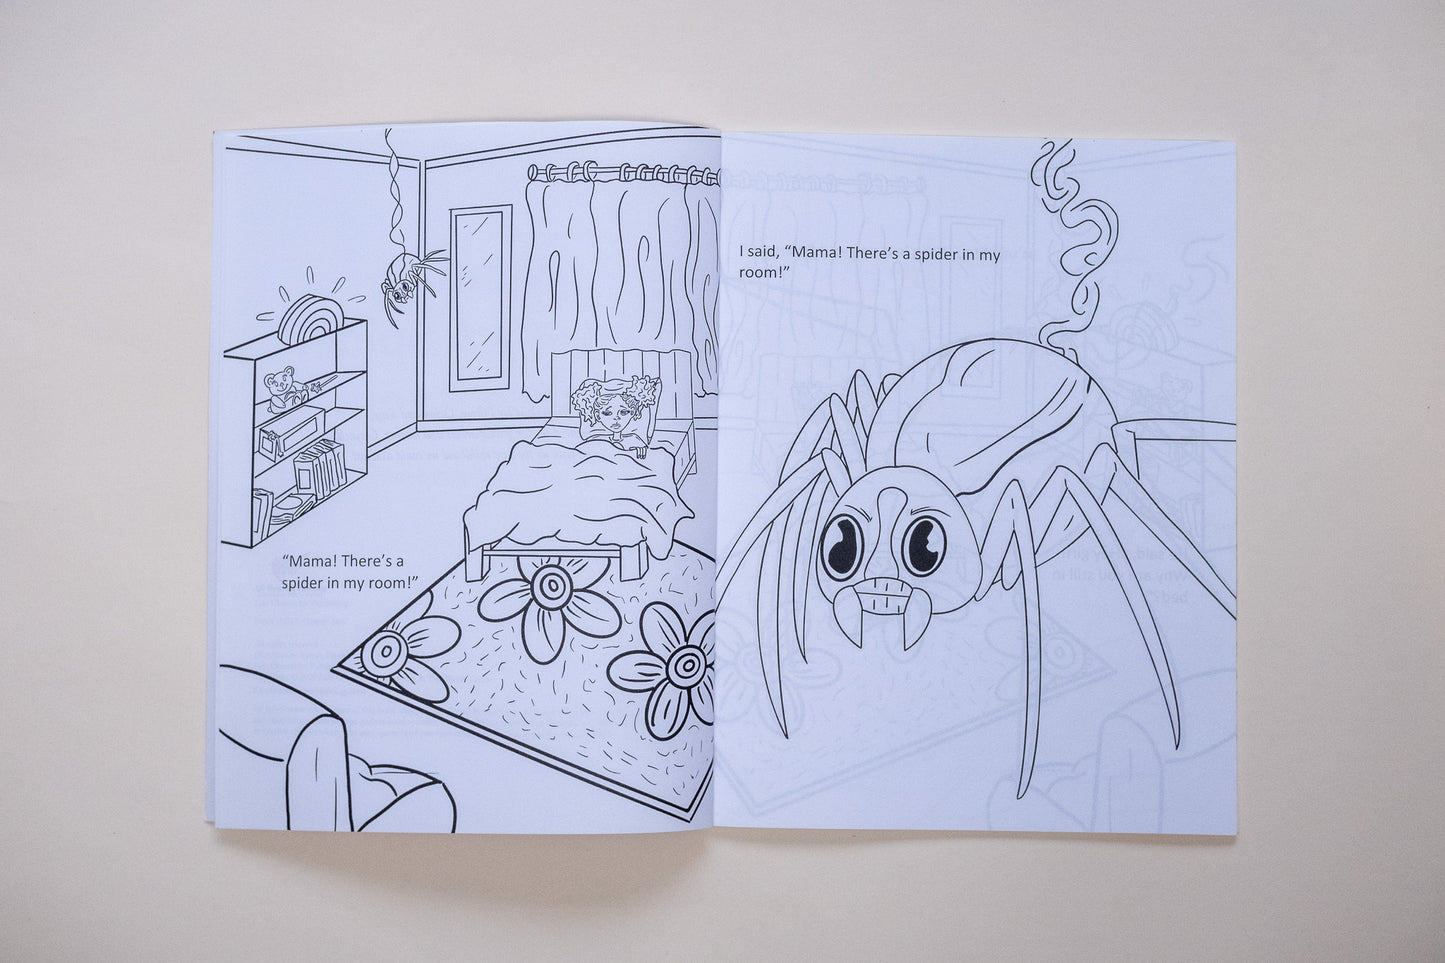 COLORING BOOK - MAMA! THERE'S A SPIDER IN MY ROOM (This item can still be purchased through Amazon. Click image for link).